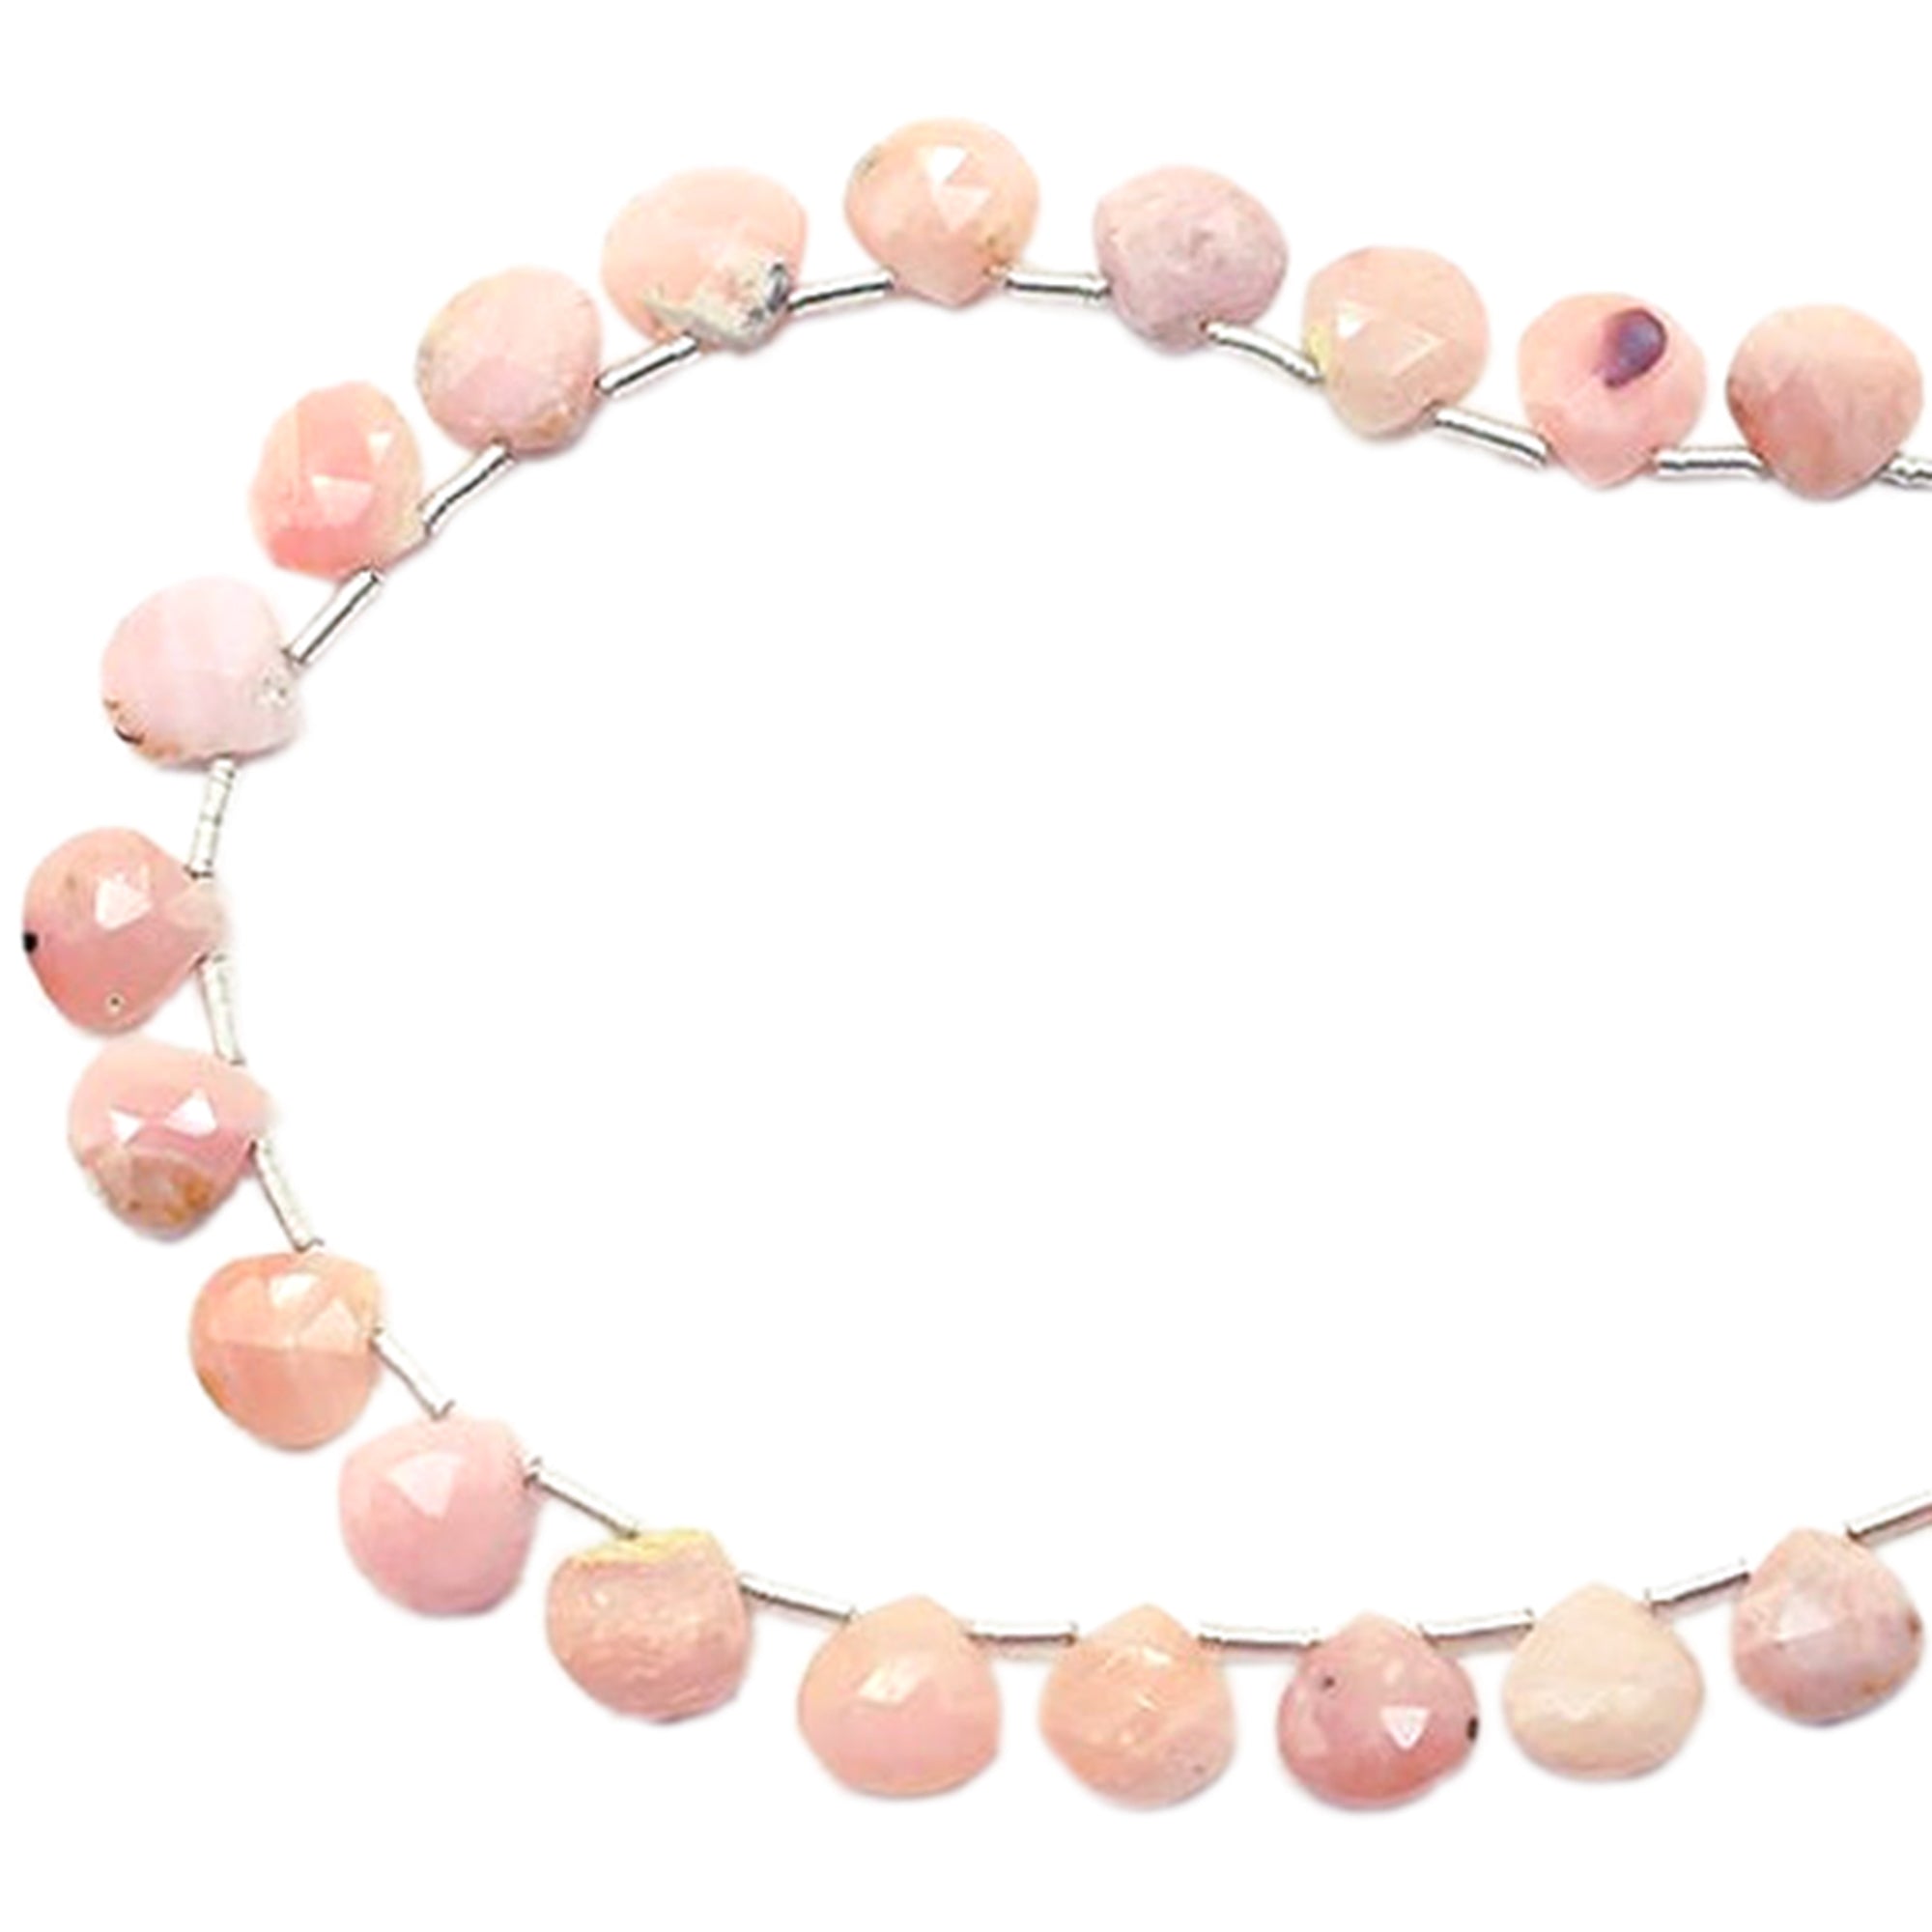 Pink Opal 8 To 9 MM Faceted Heart Shape Beads Strand